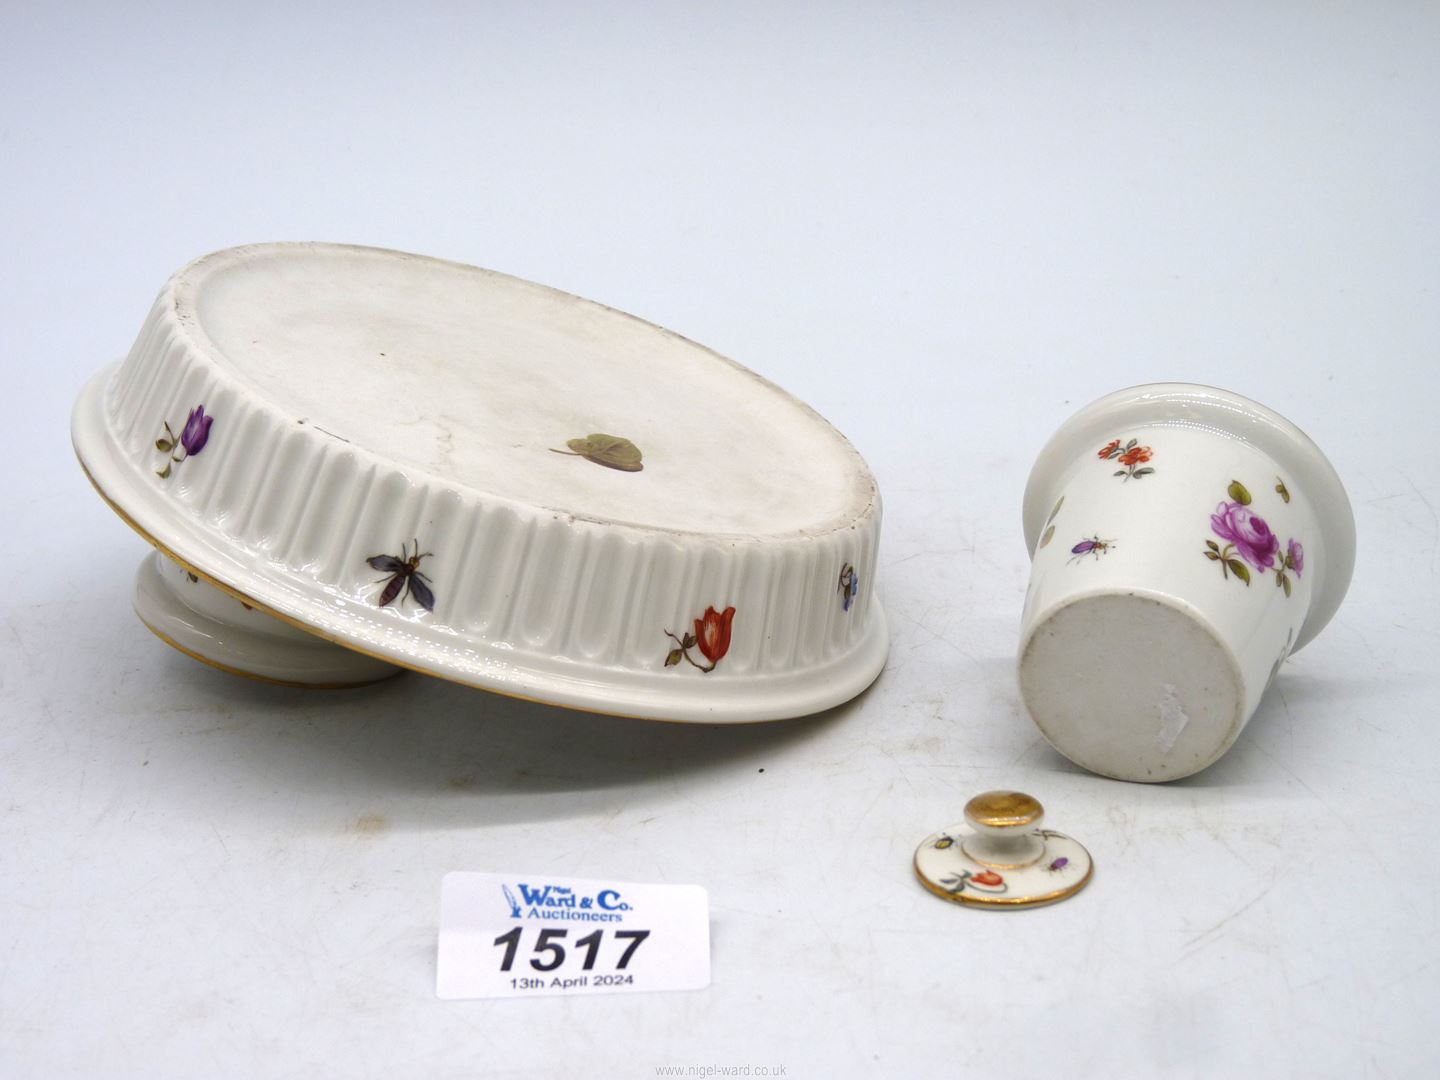 An antique continental porcelain desk set with tray and attached ink well with lid and a sander. - Image 3 of 4